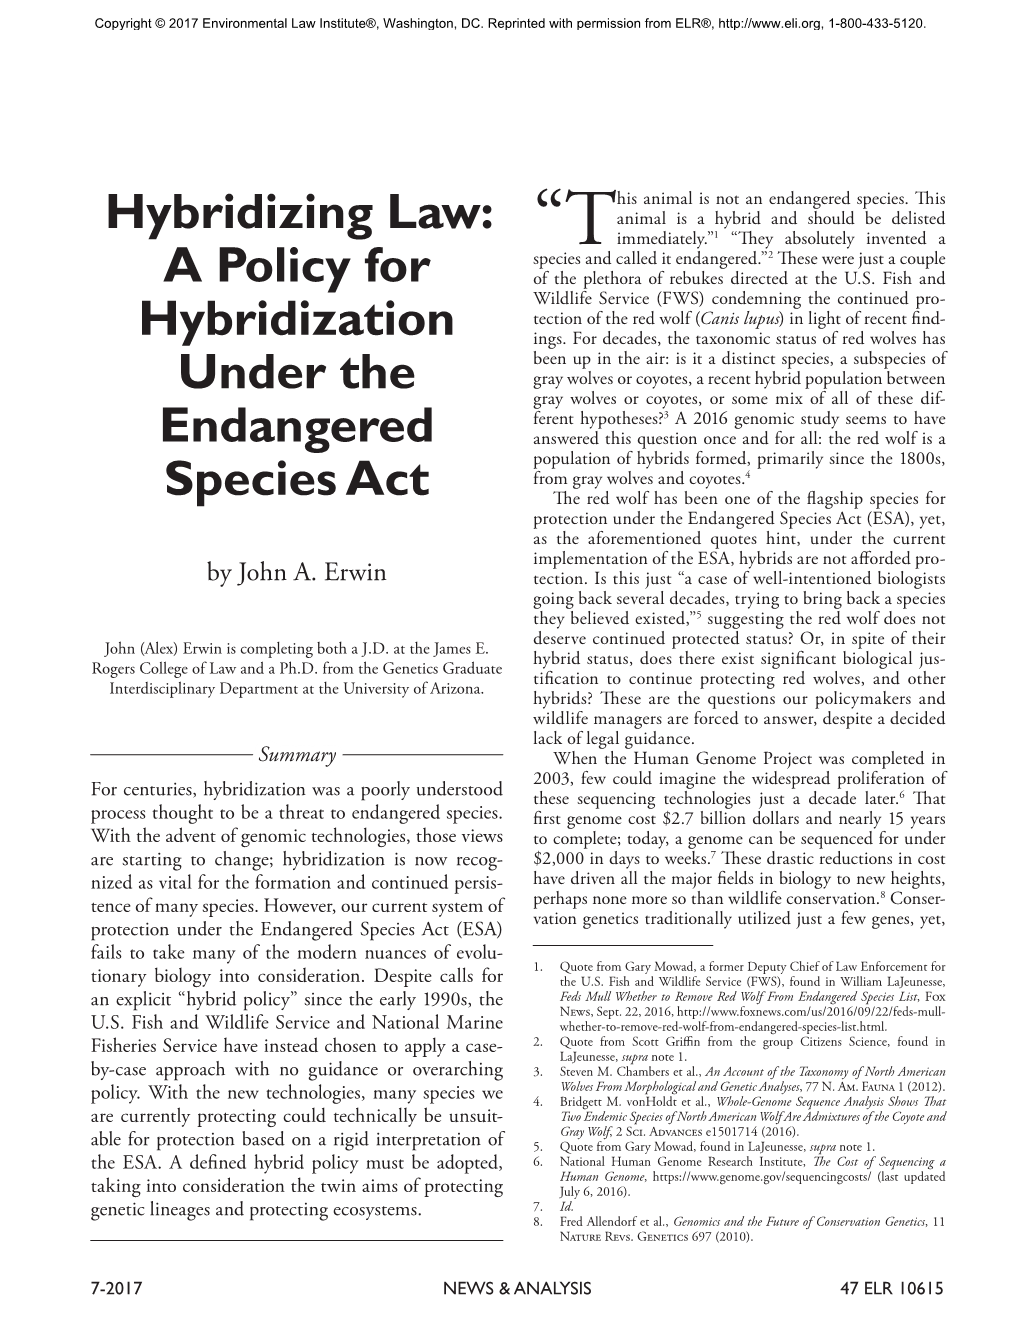 A Policy for Hybridization Under the Endangered Species